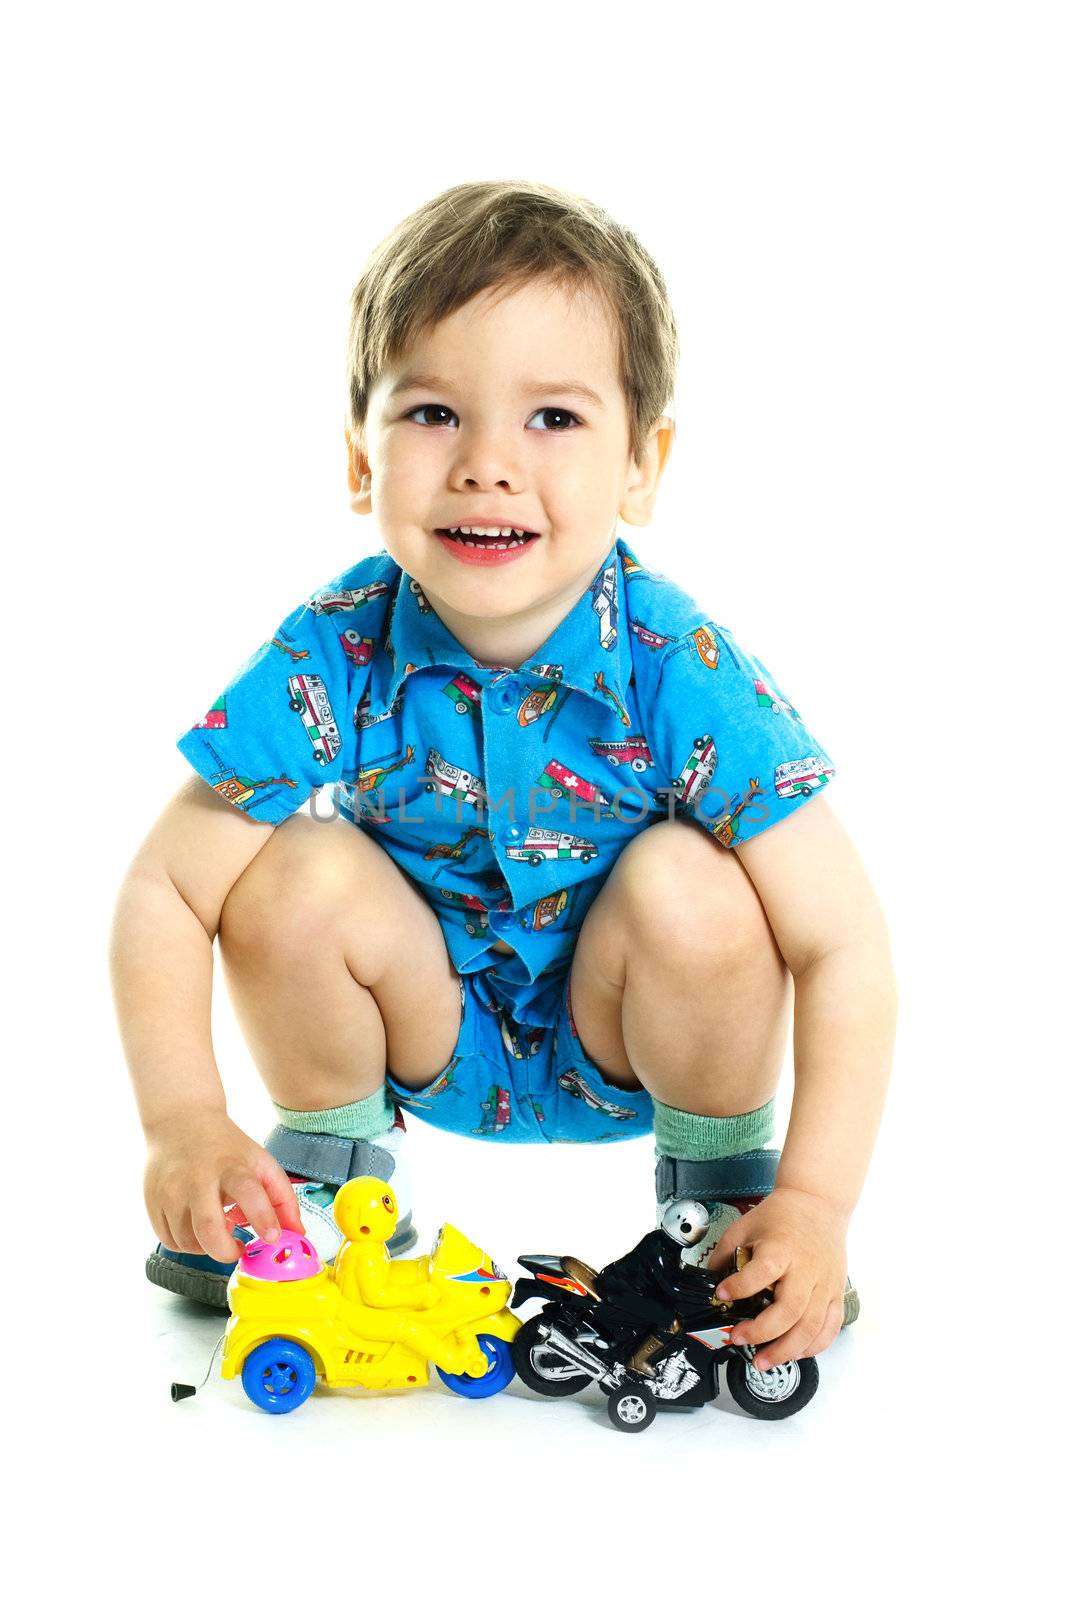 portrait of a cute happy three year old boy playing with toy motorcycles